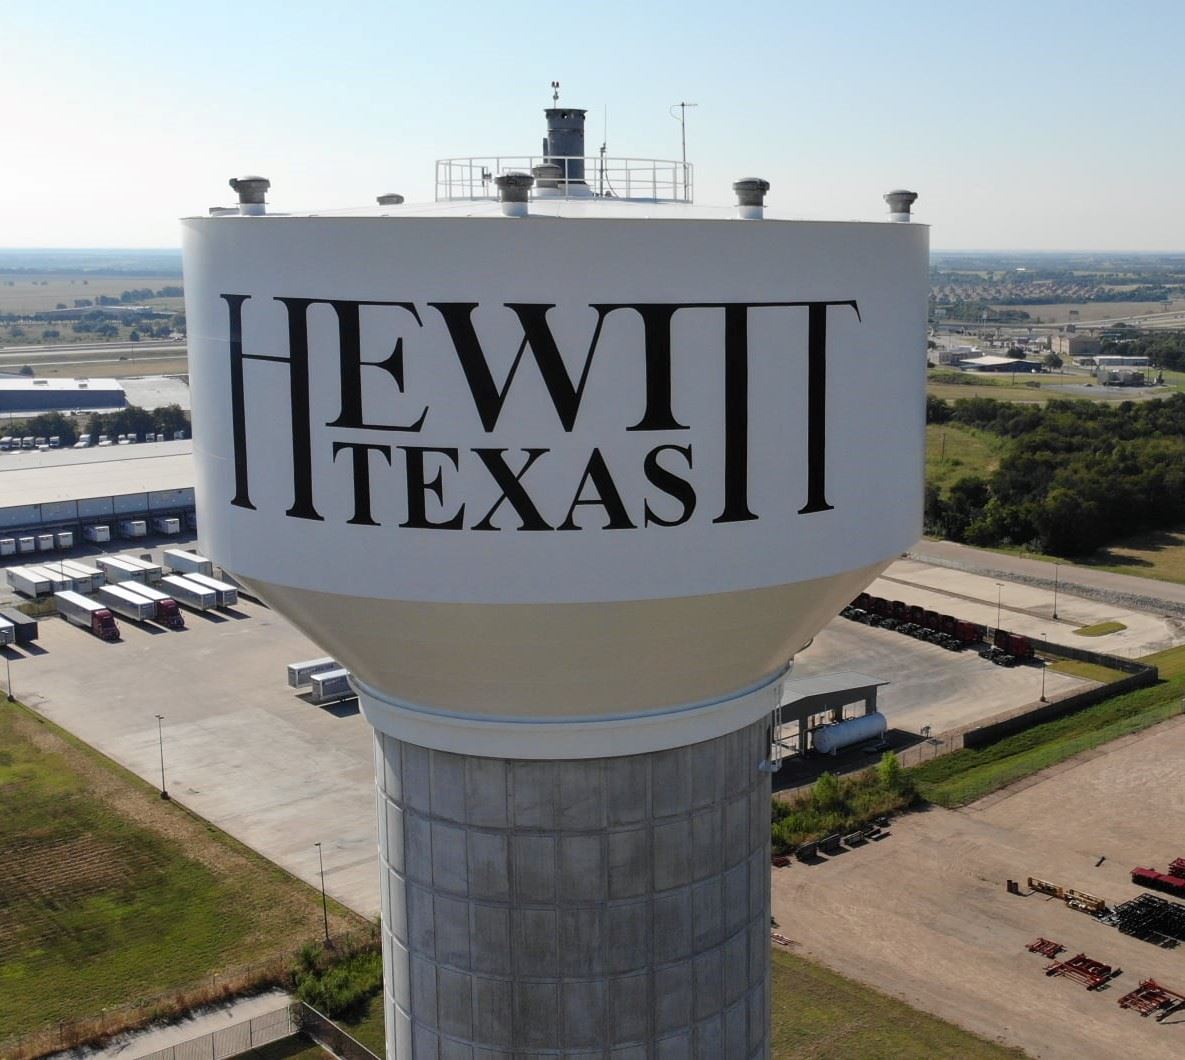 Arieal photo of Hewitt Texas Water tower that says Hewitt Texas on the side of it